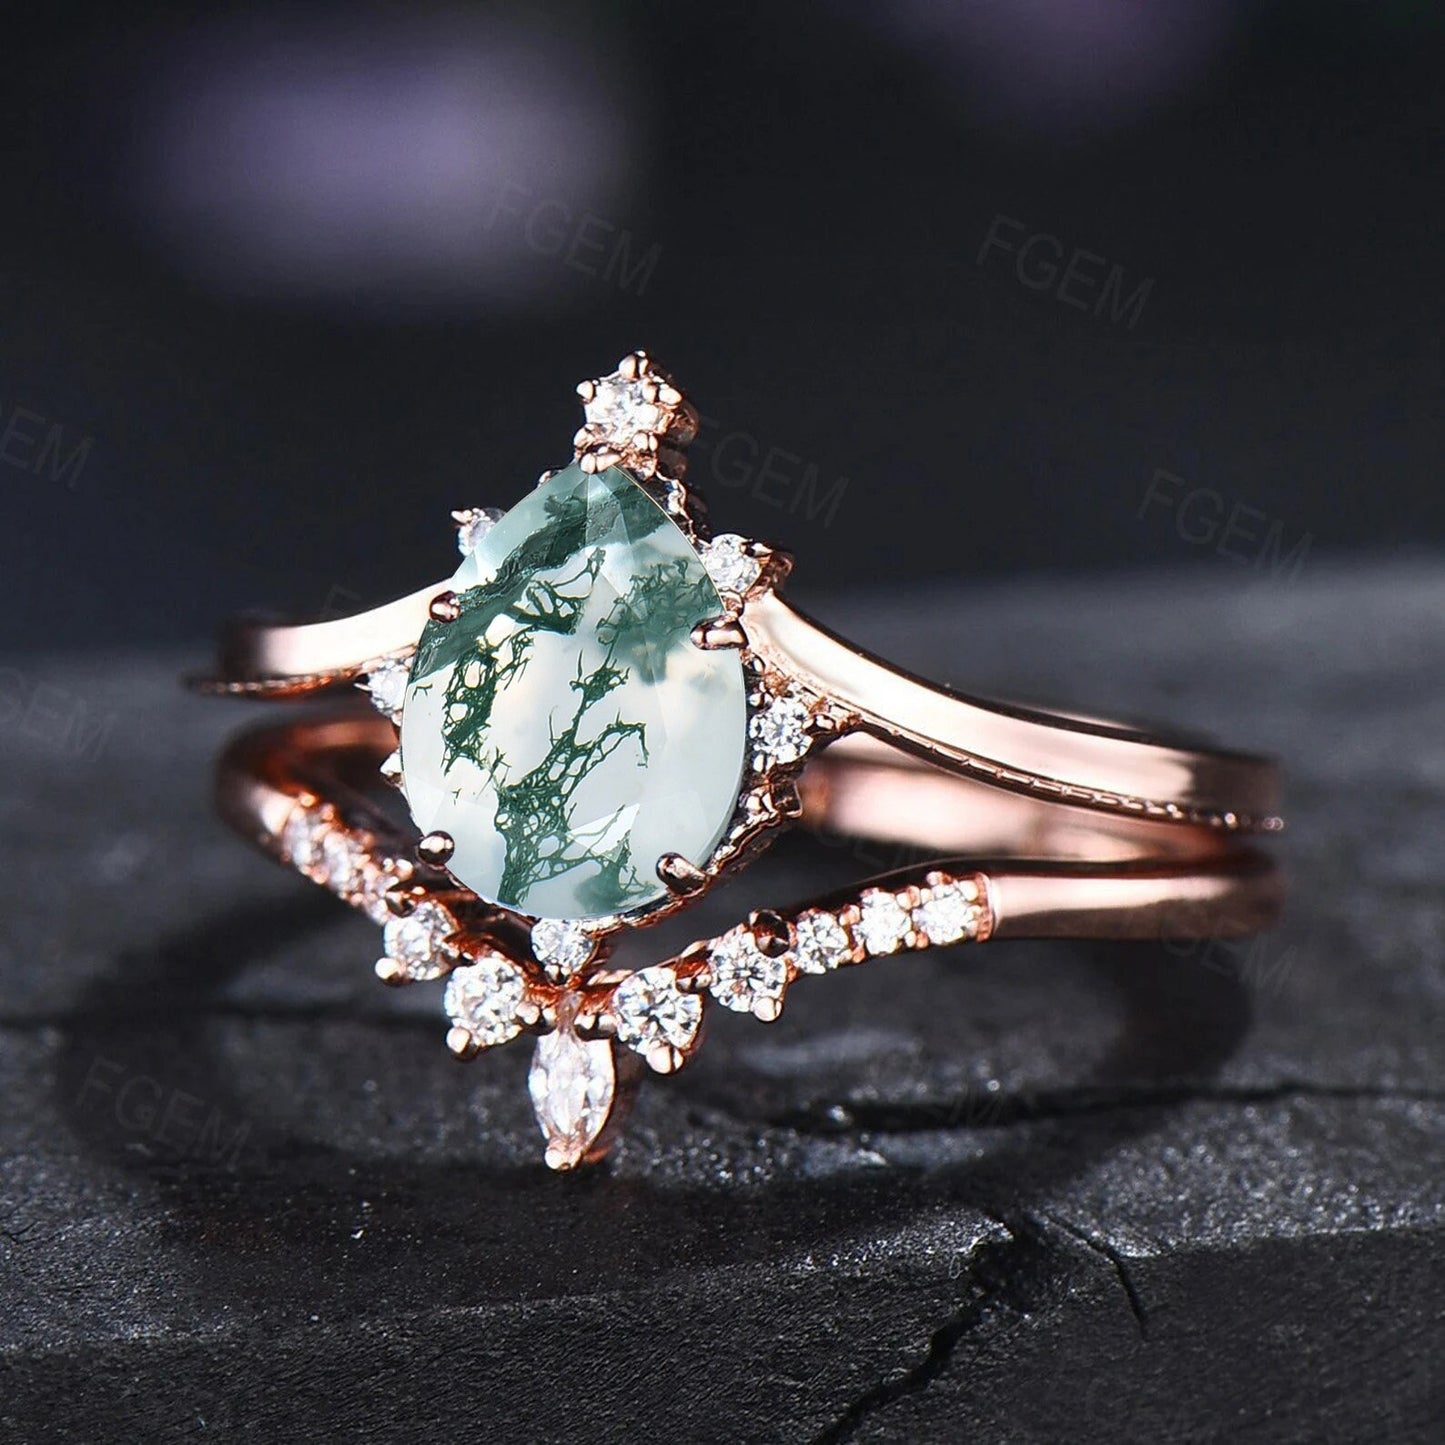 Pear Shaped Moss Agate Engagement Ring Set Sterling Silver Curve Wedding Band Rose Gold Moss Agate Bridal Set For Women Unique Proposal Gift